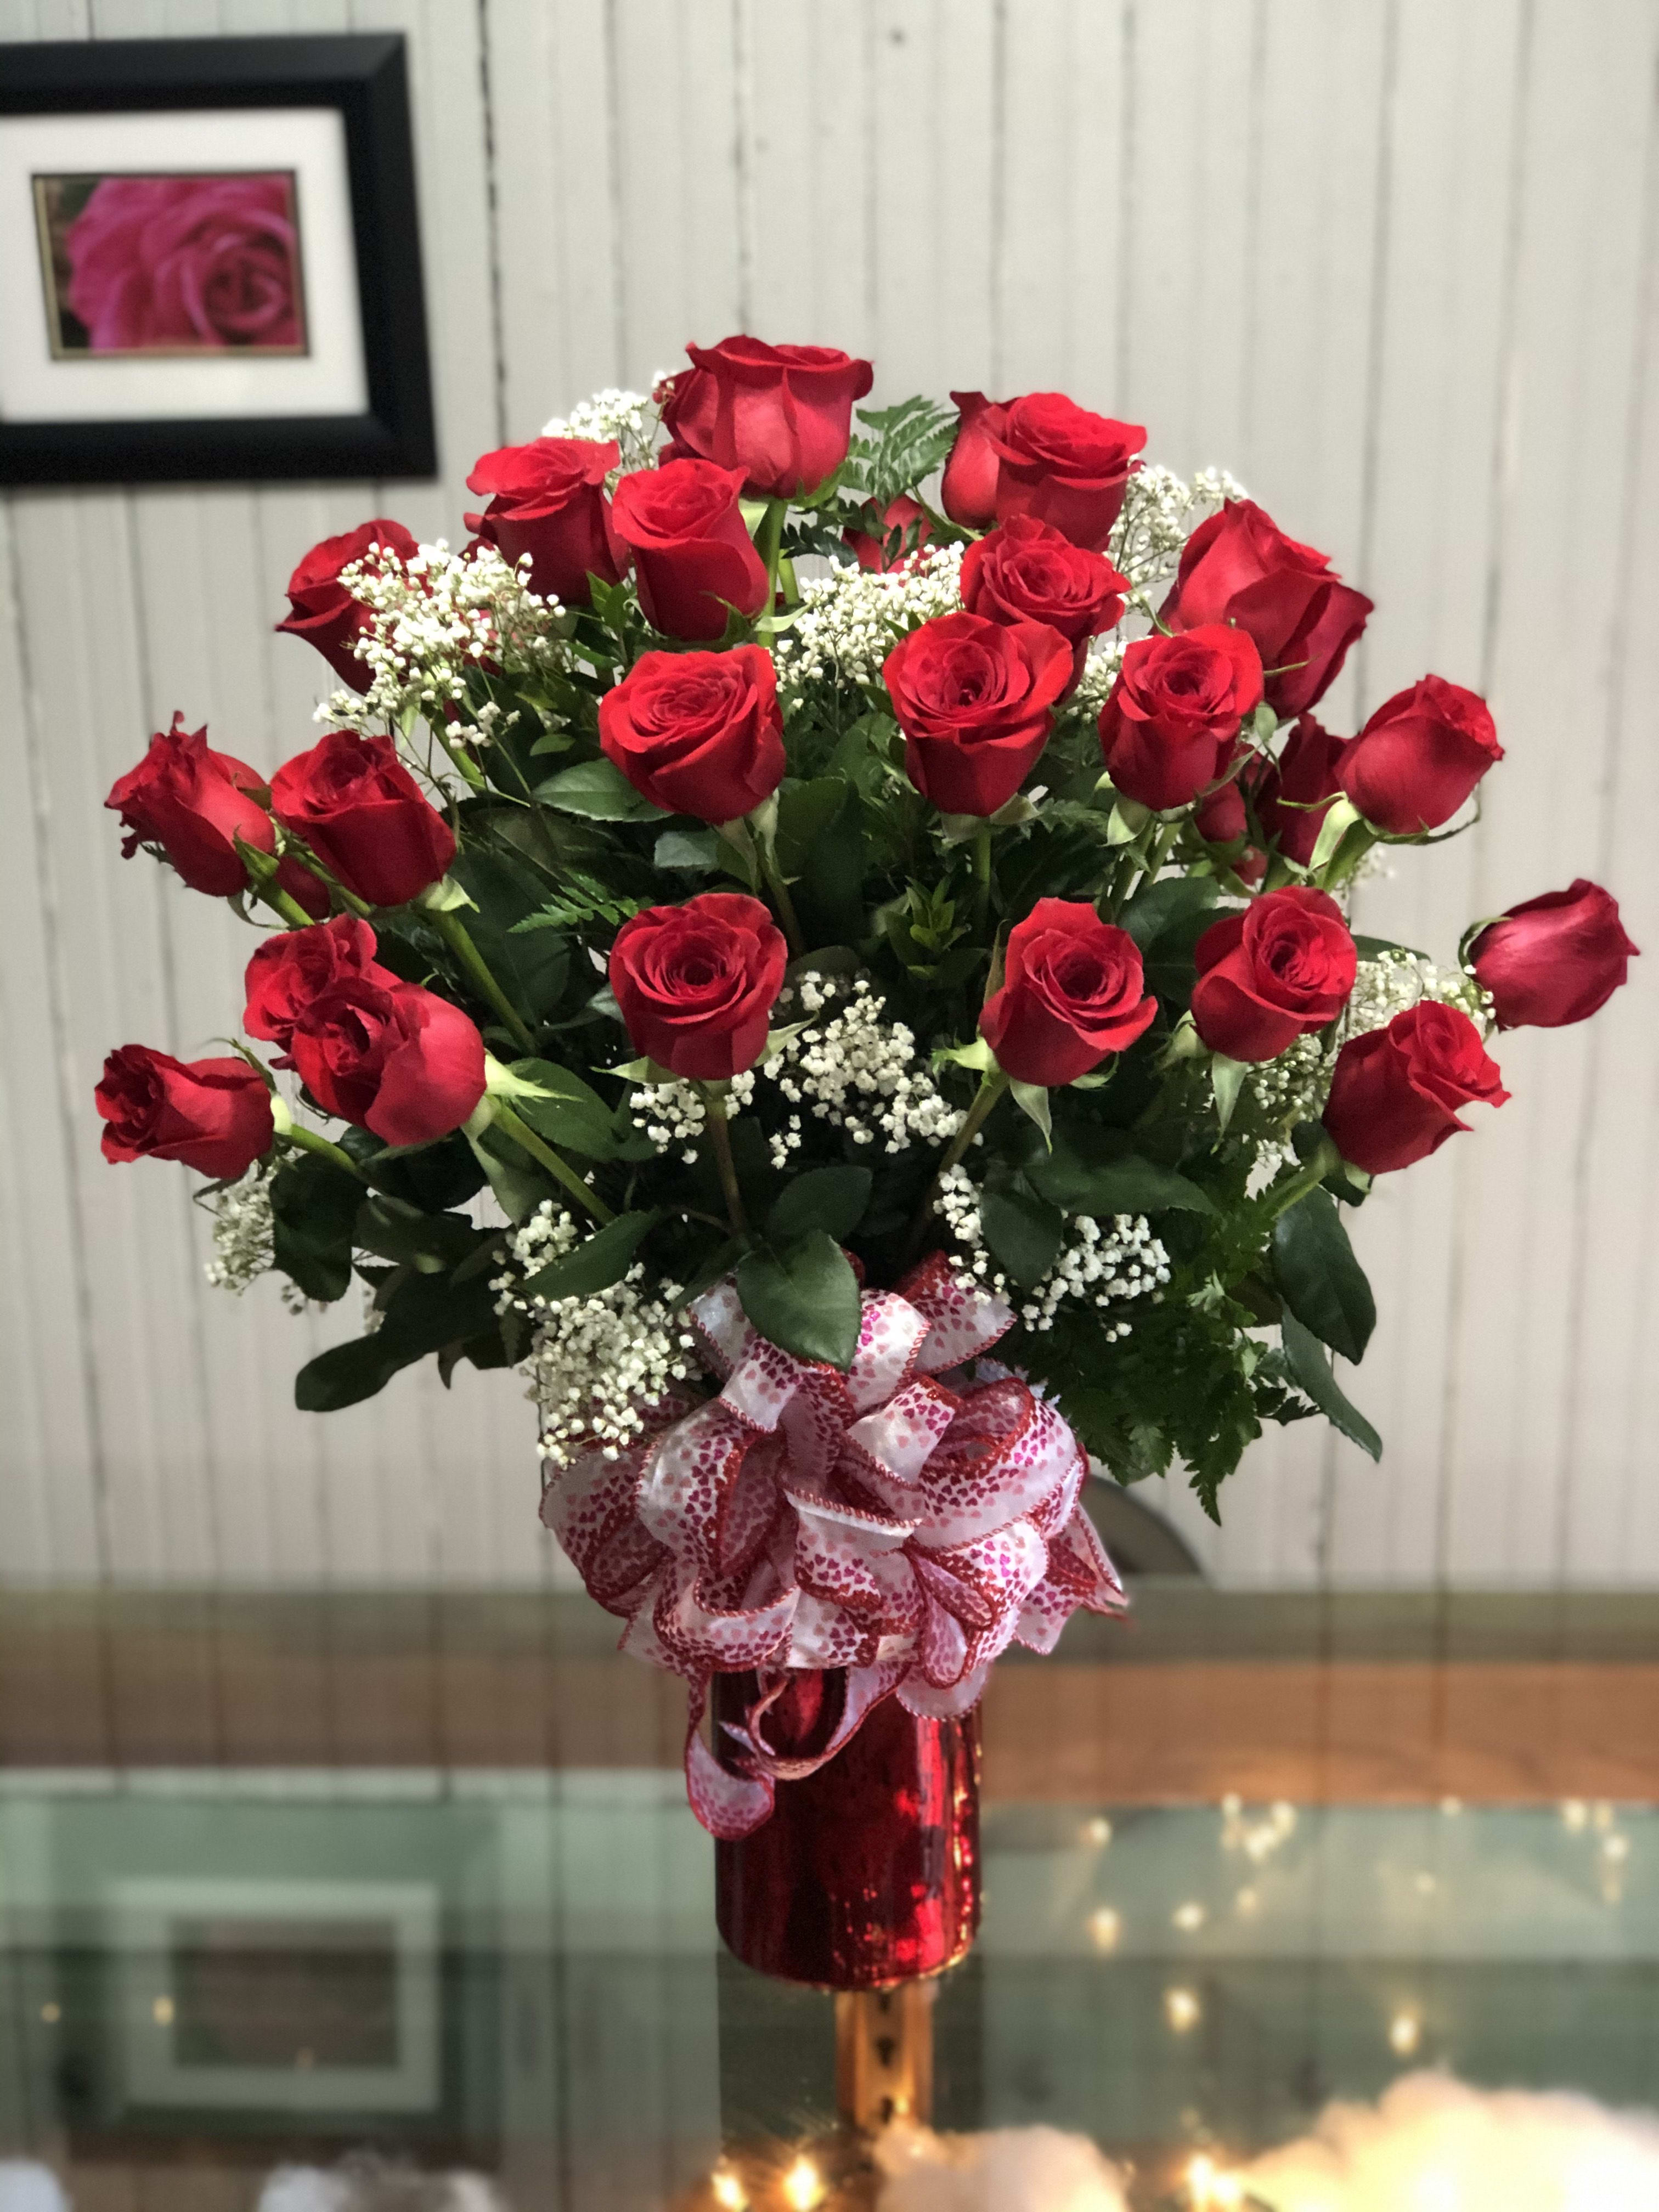 3 Dozen Freedom Red Roses - An grand arrangement of 36 roses that would wow anybody! 